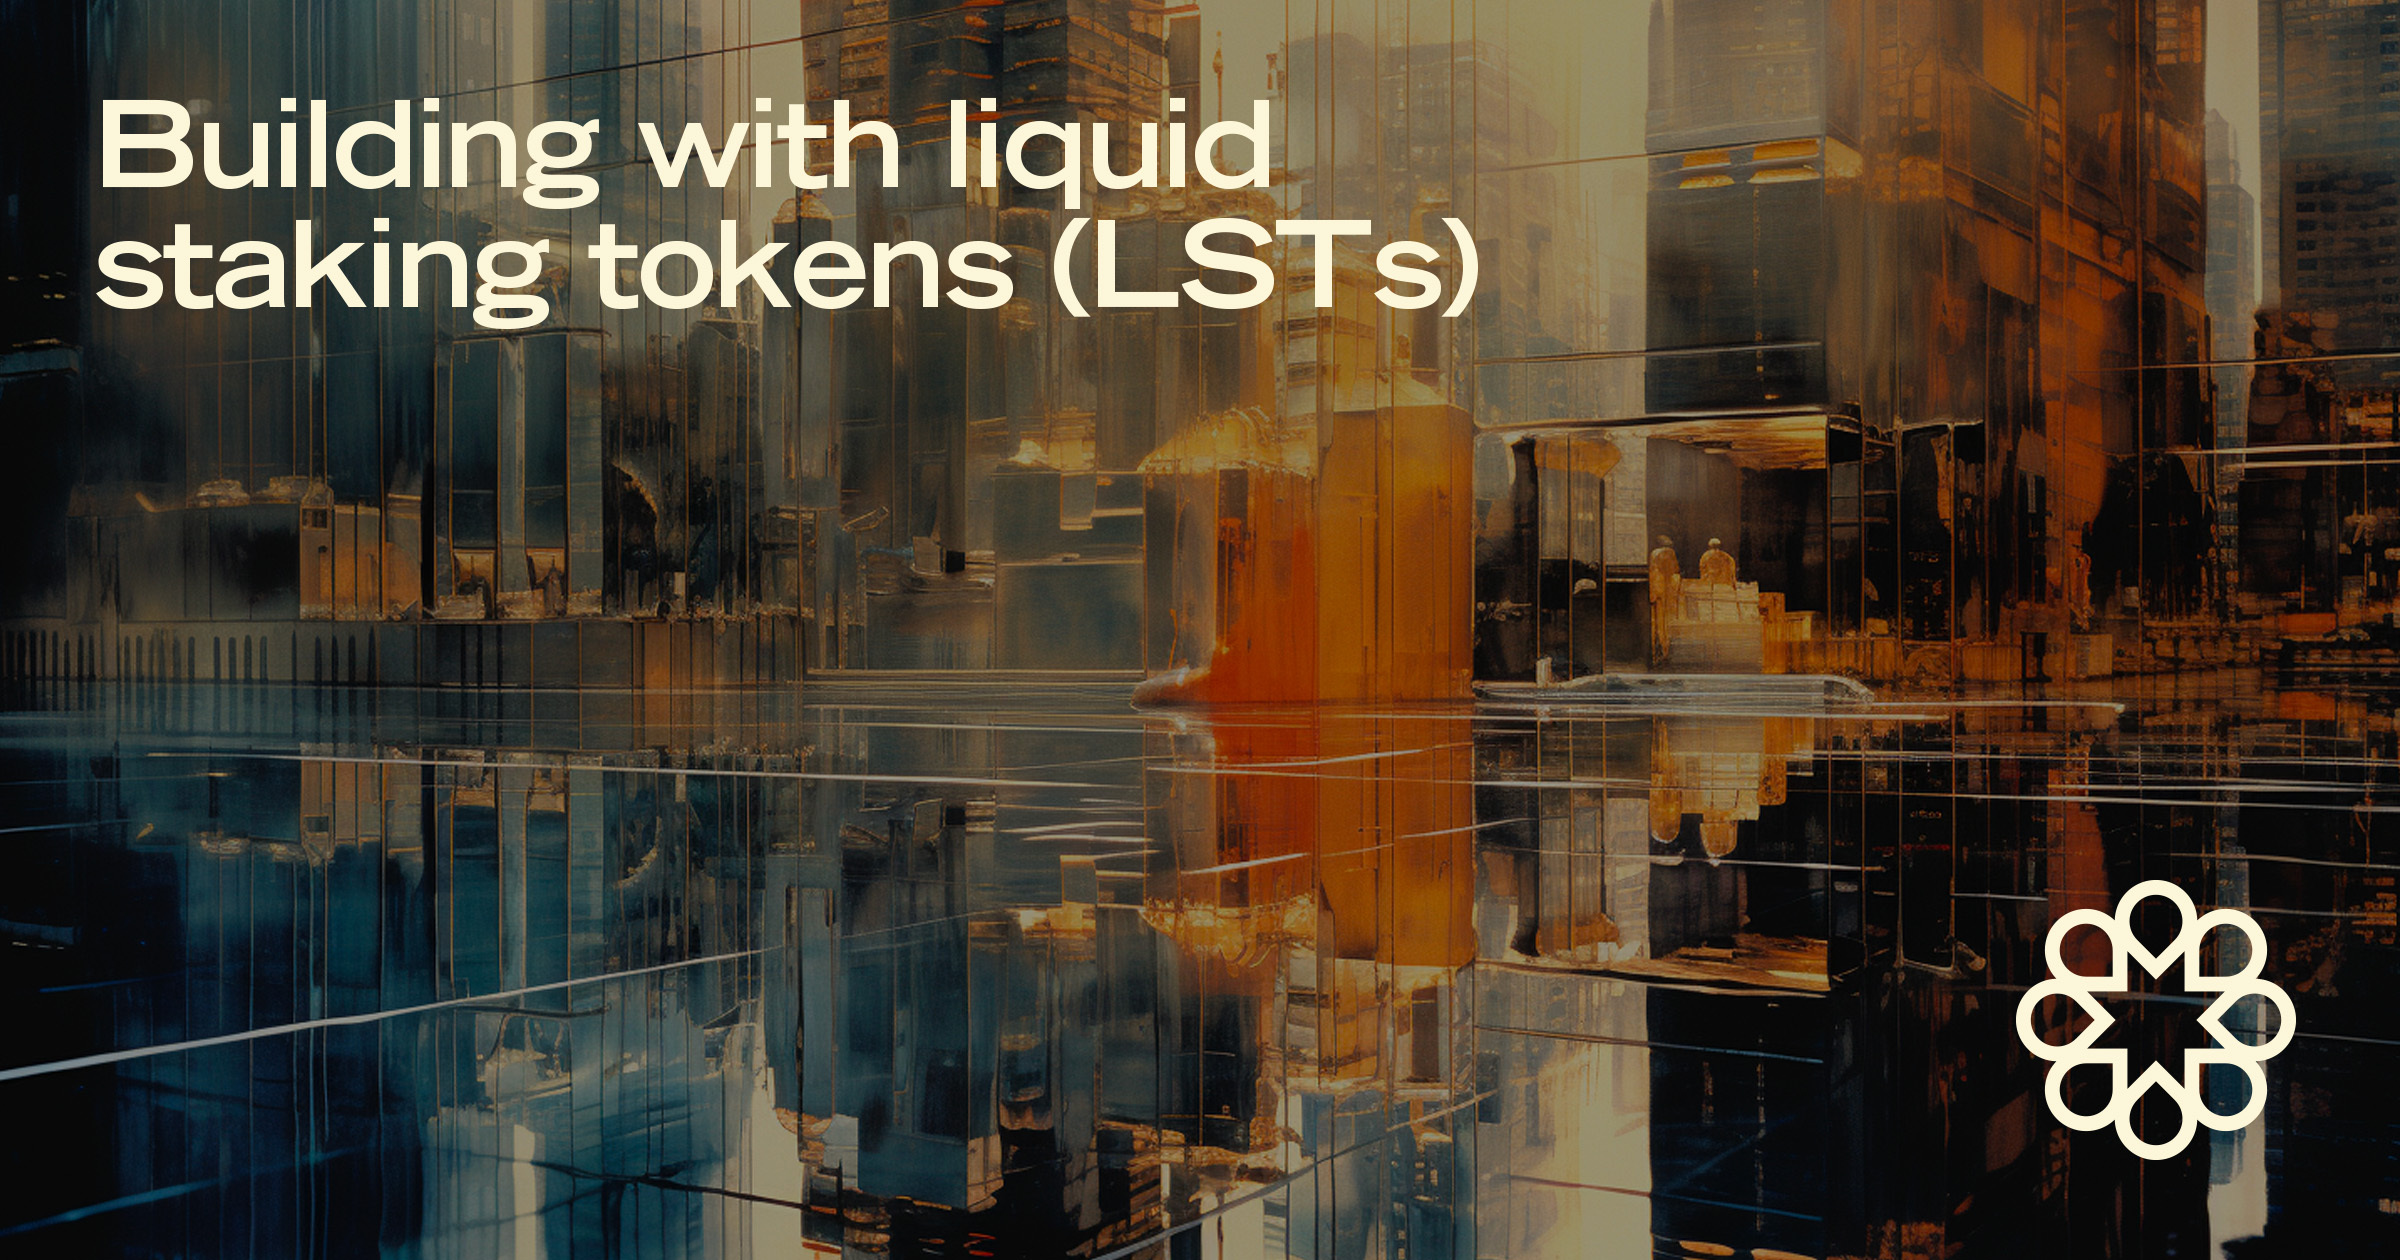 Building with liquid staking tokens (LSTs)